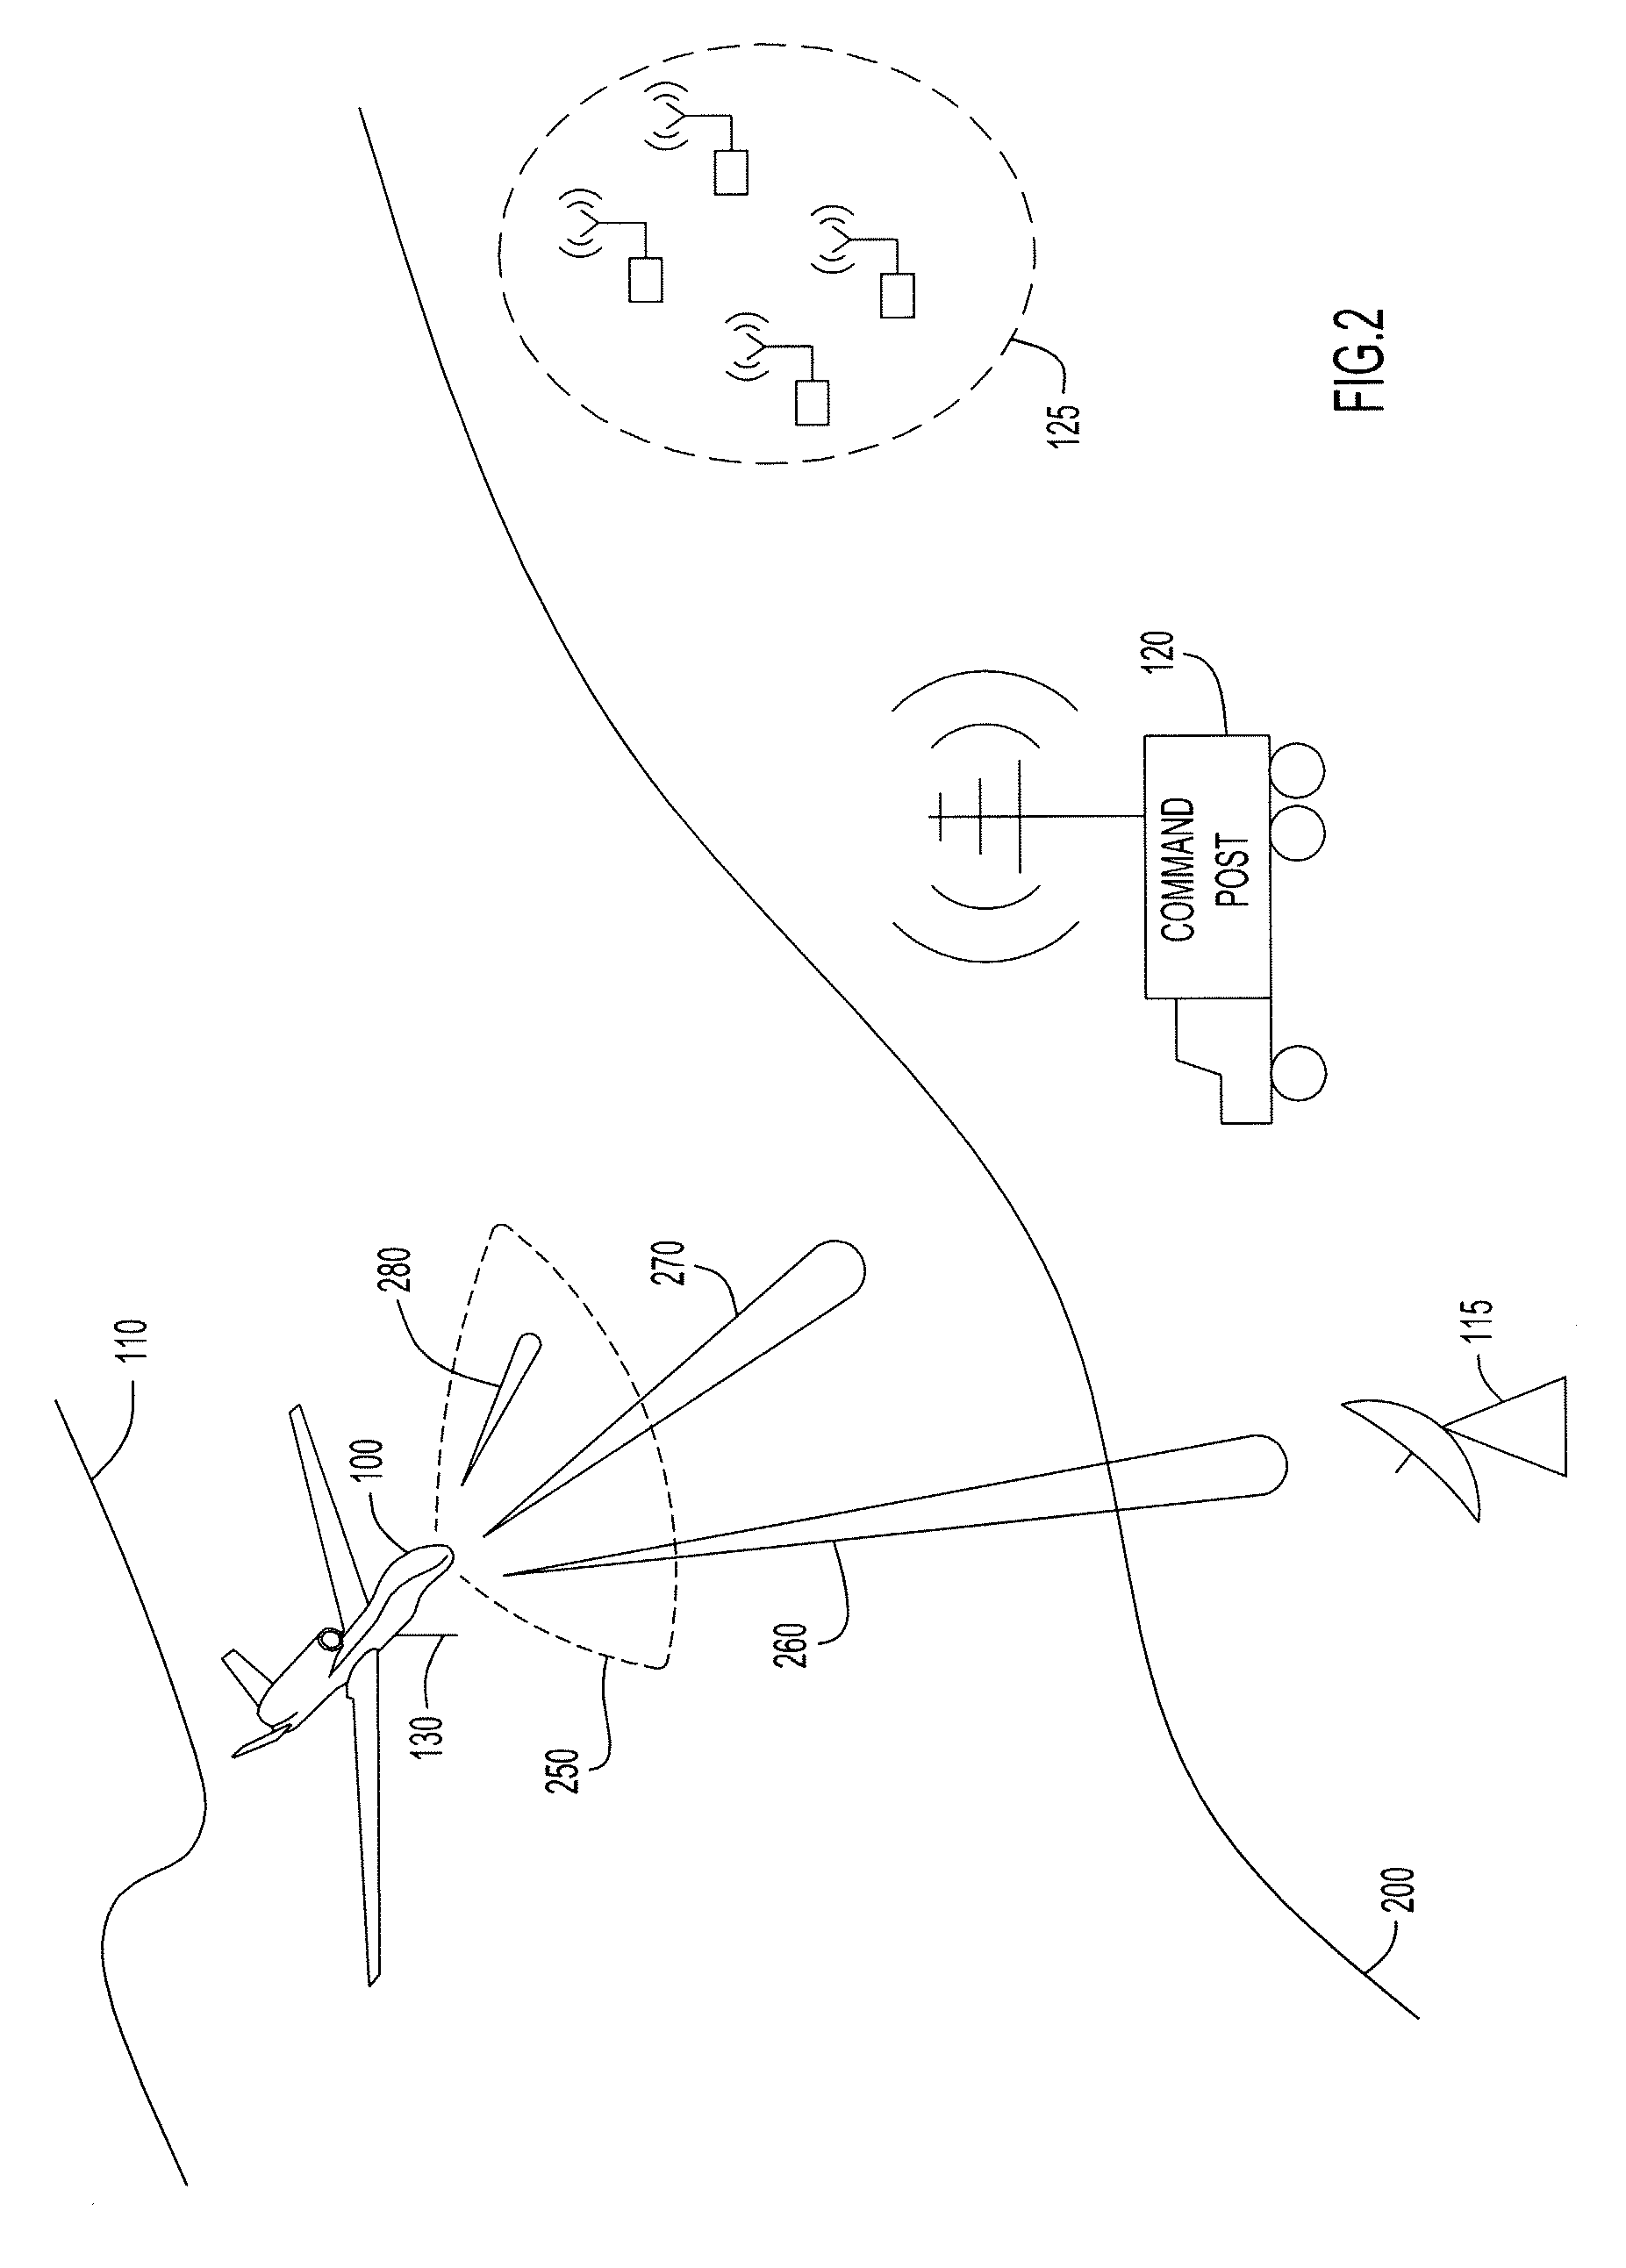 System and method for allocating jamming energy based on three-dimensional geolocation of emitters